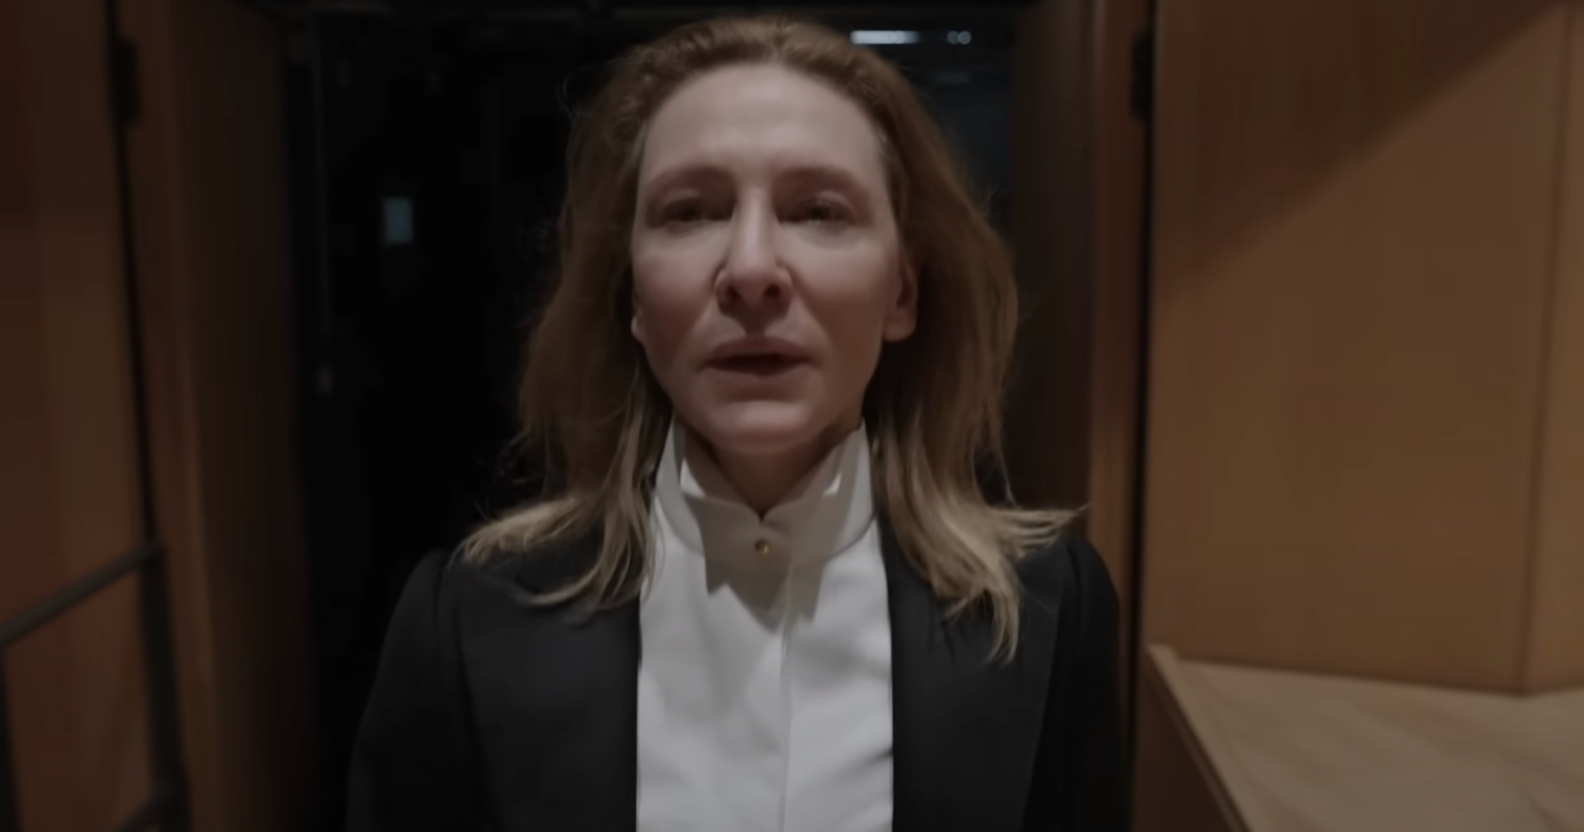 Cate Blanchett as gay conductor Lydia Tár in Tood Field's drama film Tár